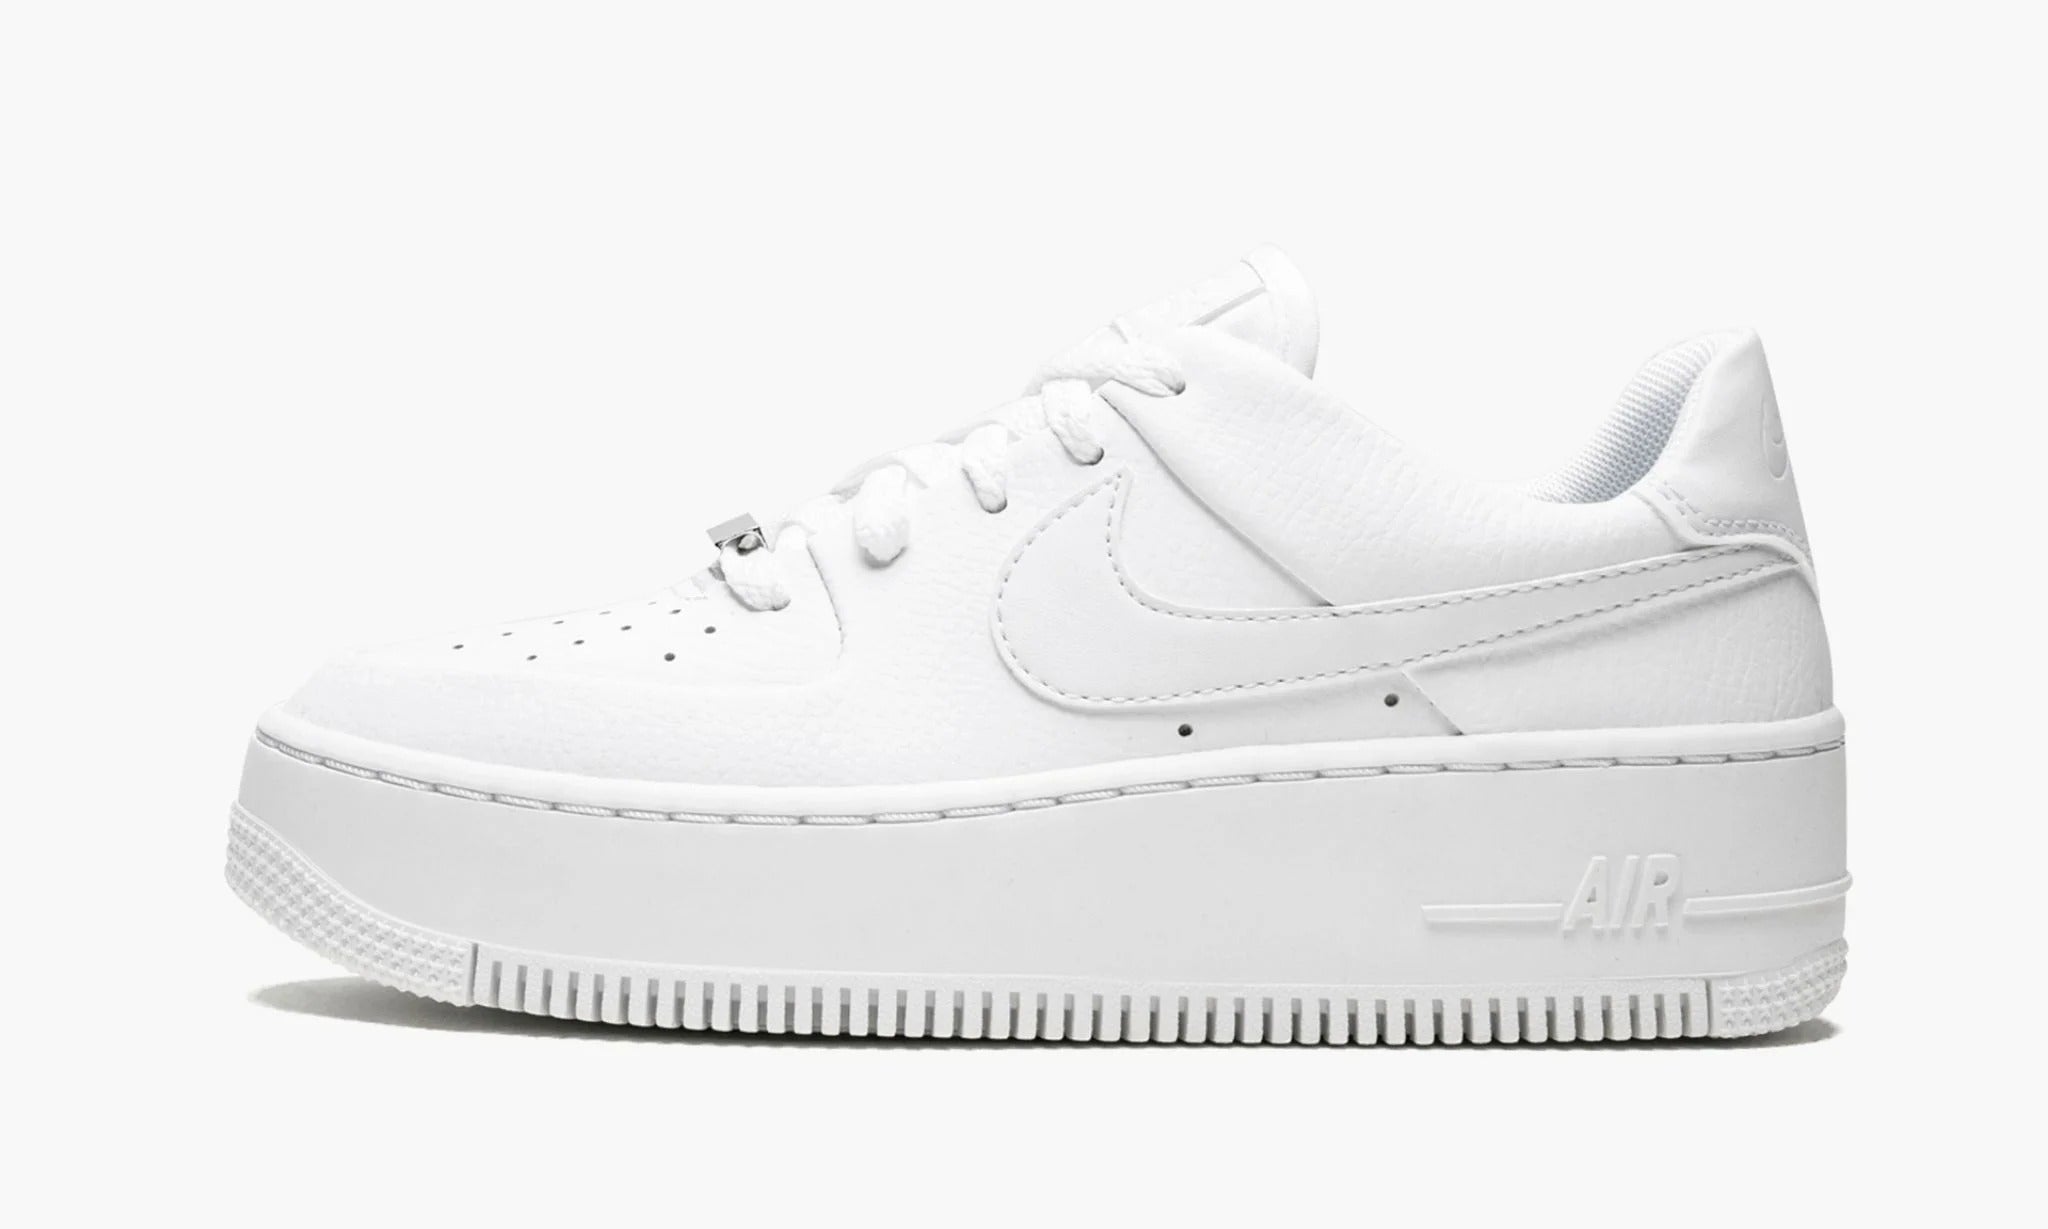 Подошва air force. Nike Air Force 1 Low White. Кроссовки Nike Air Force 1 Low Triple White. Nike Air Force 1 Sage Low белые. Nike Air Force 1 Sage Low.